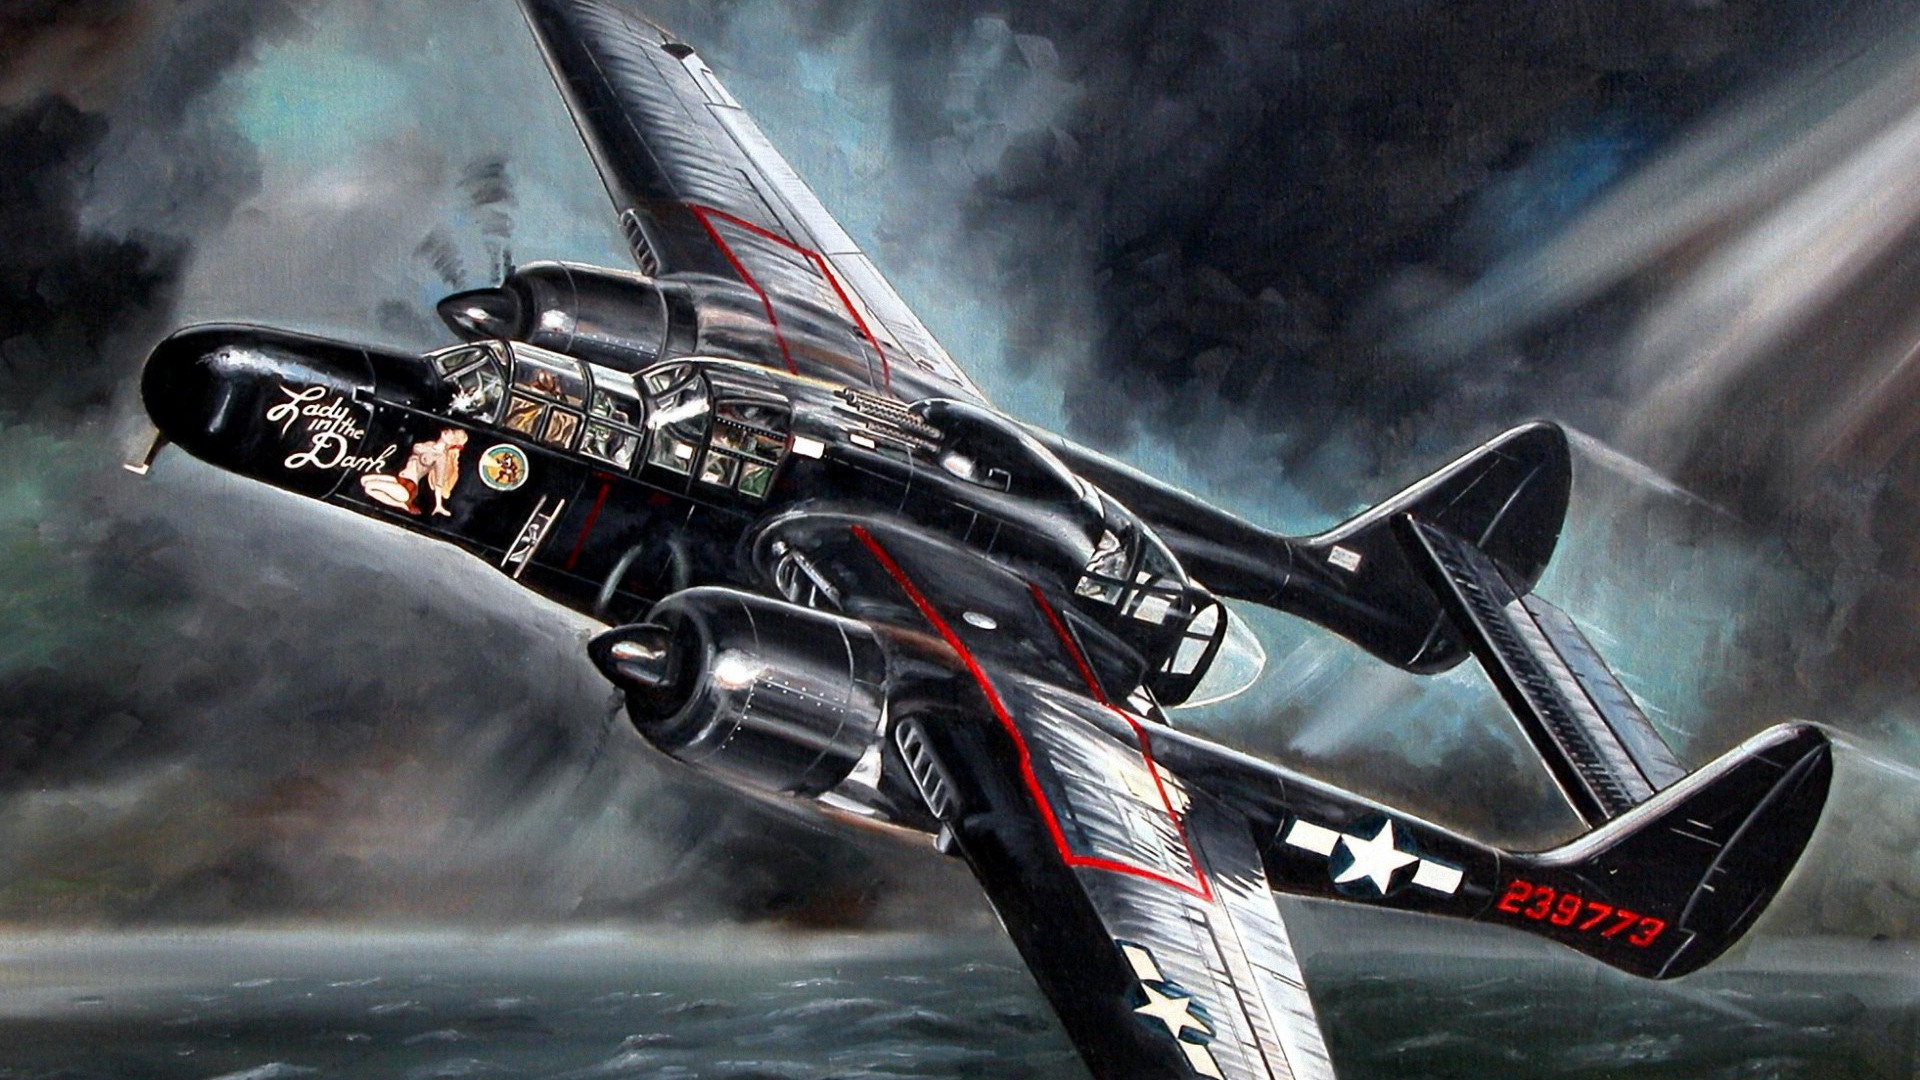 Military aircraft flight exquisite painting wallpapers #10 - 1920x1080